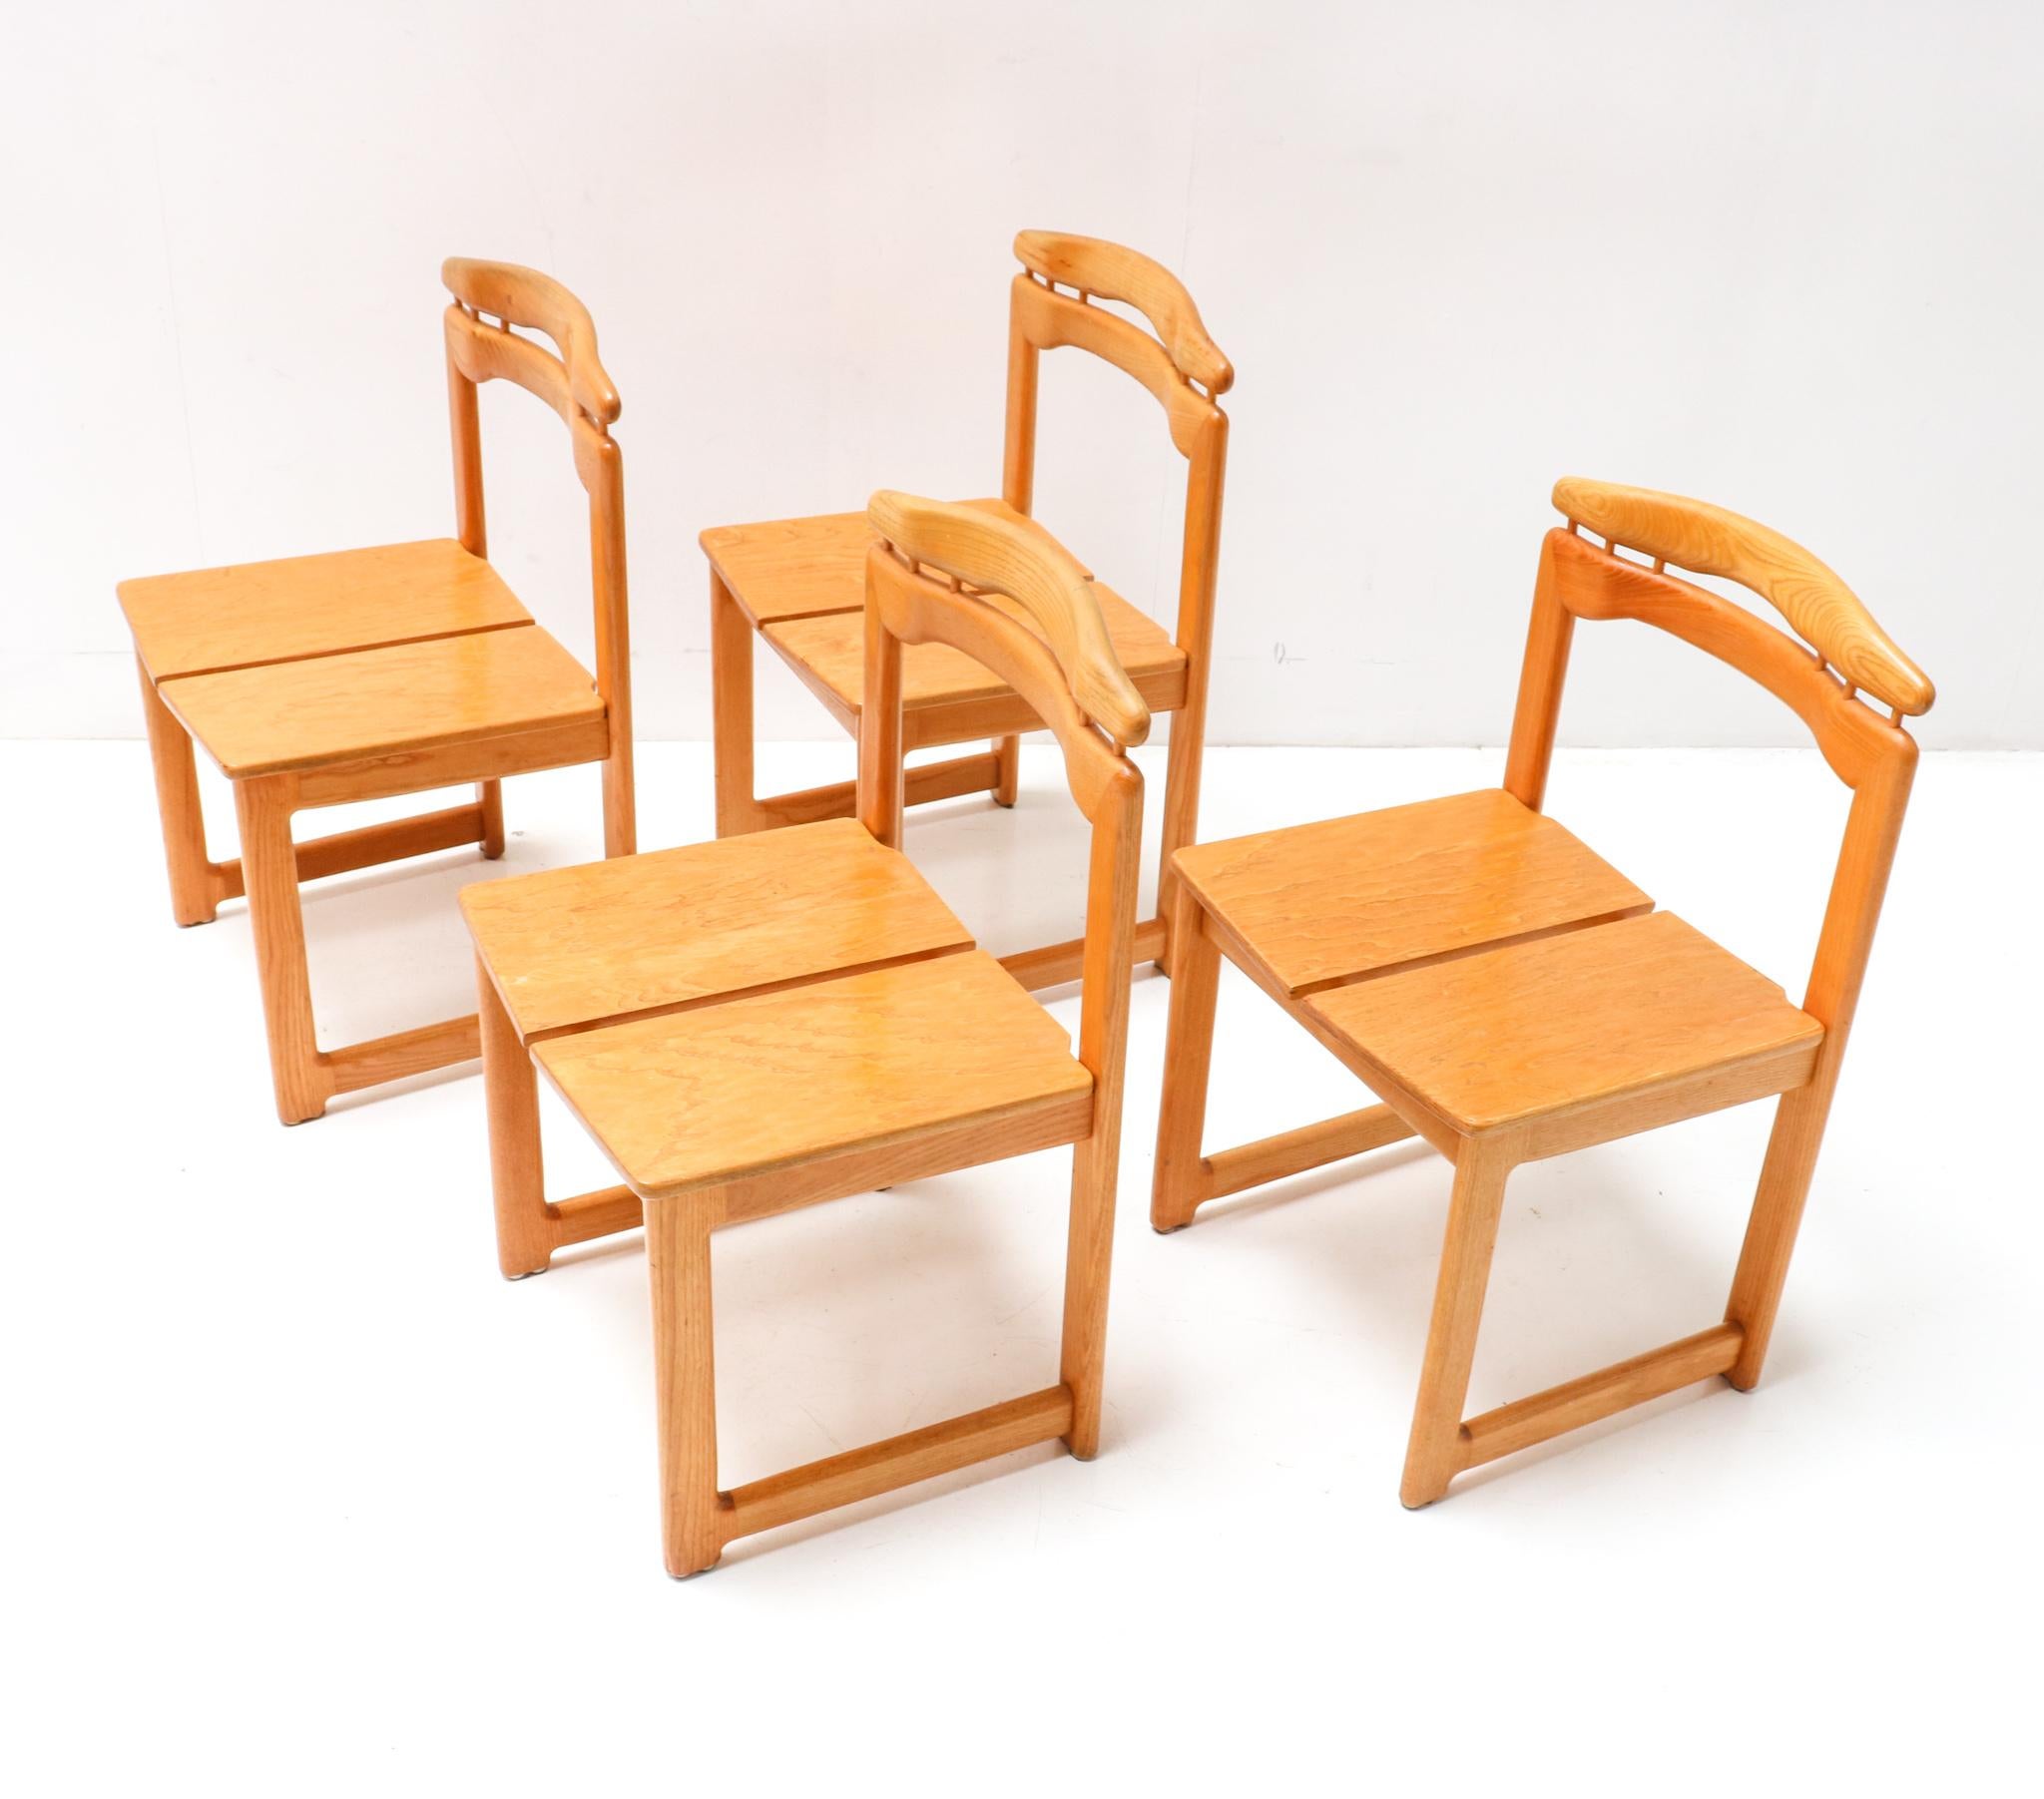 Four Ash Italian Mid-Century Modern Tapiovaara Style Chairs, 1970s In Good Condition For Sale In Amsterdam, NL